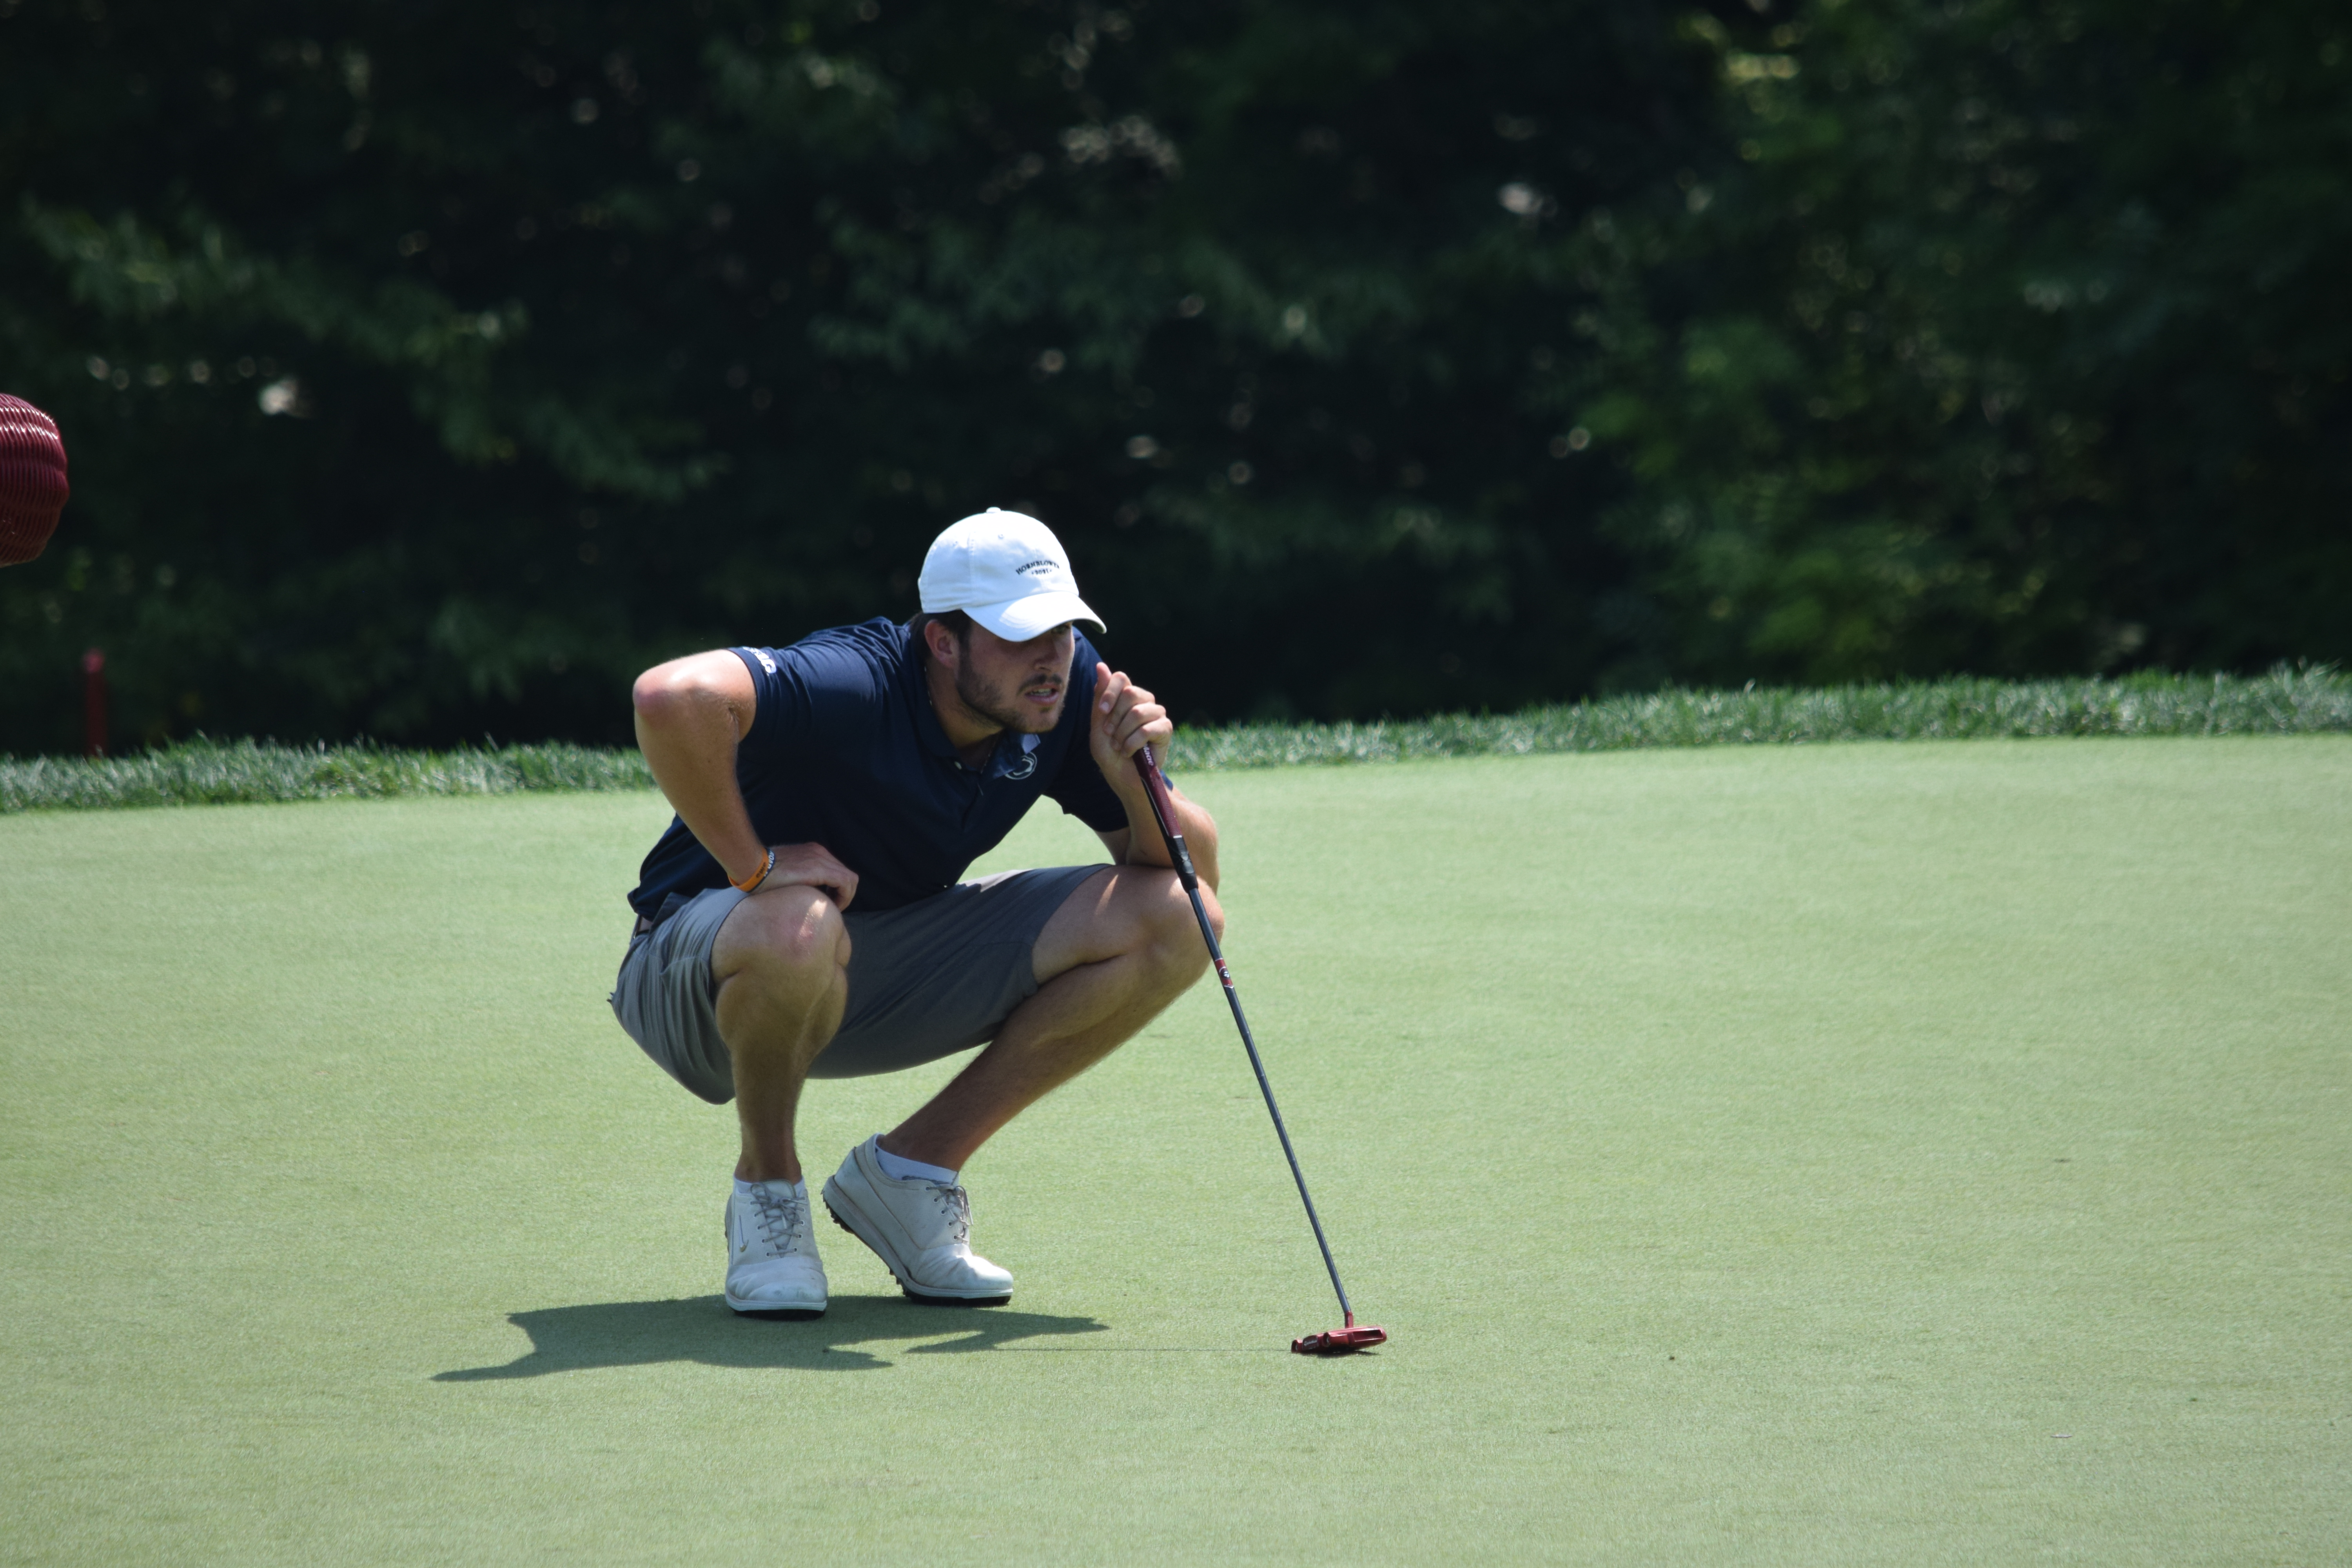 Philly Golf Penn States Patrick Sheehan leads Pennsylvania Amateur Championship after two rounds